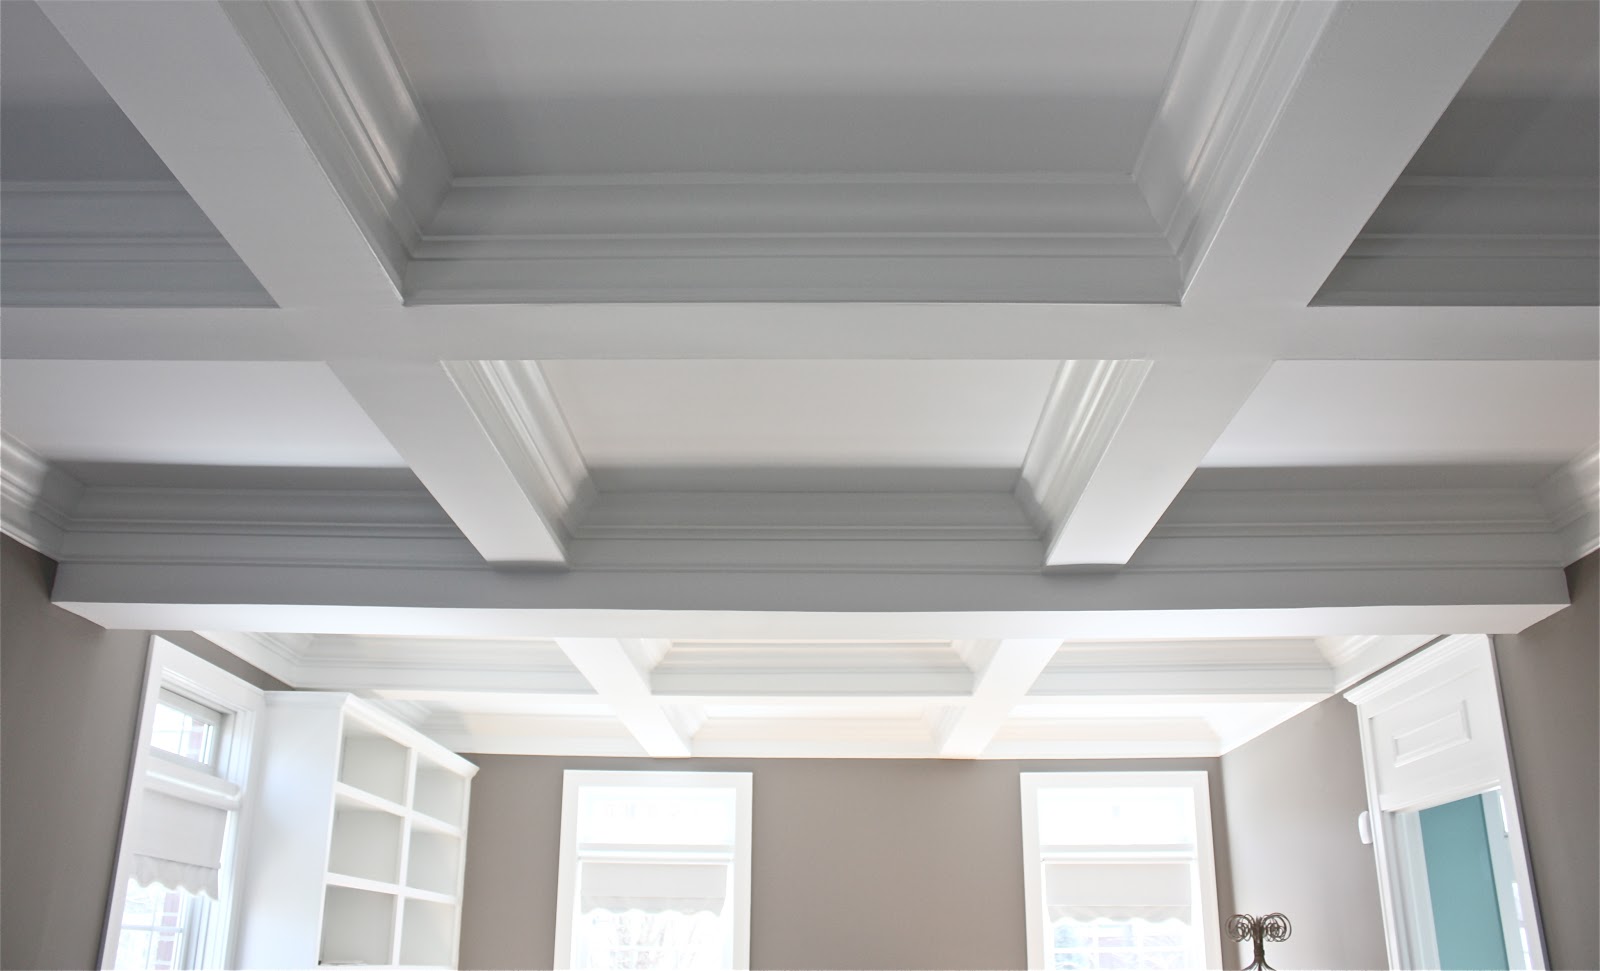 What Is The Cost To Install A Ceiling, How Much Does It Cost To Do A Coffered Ceiling